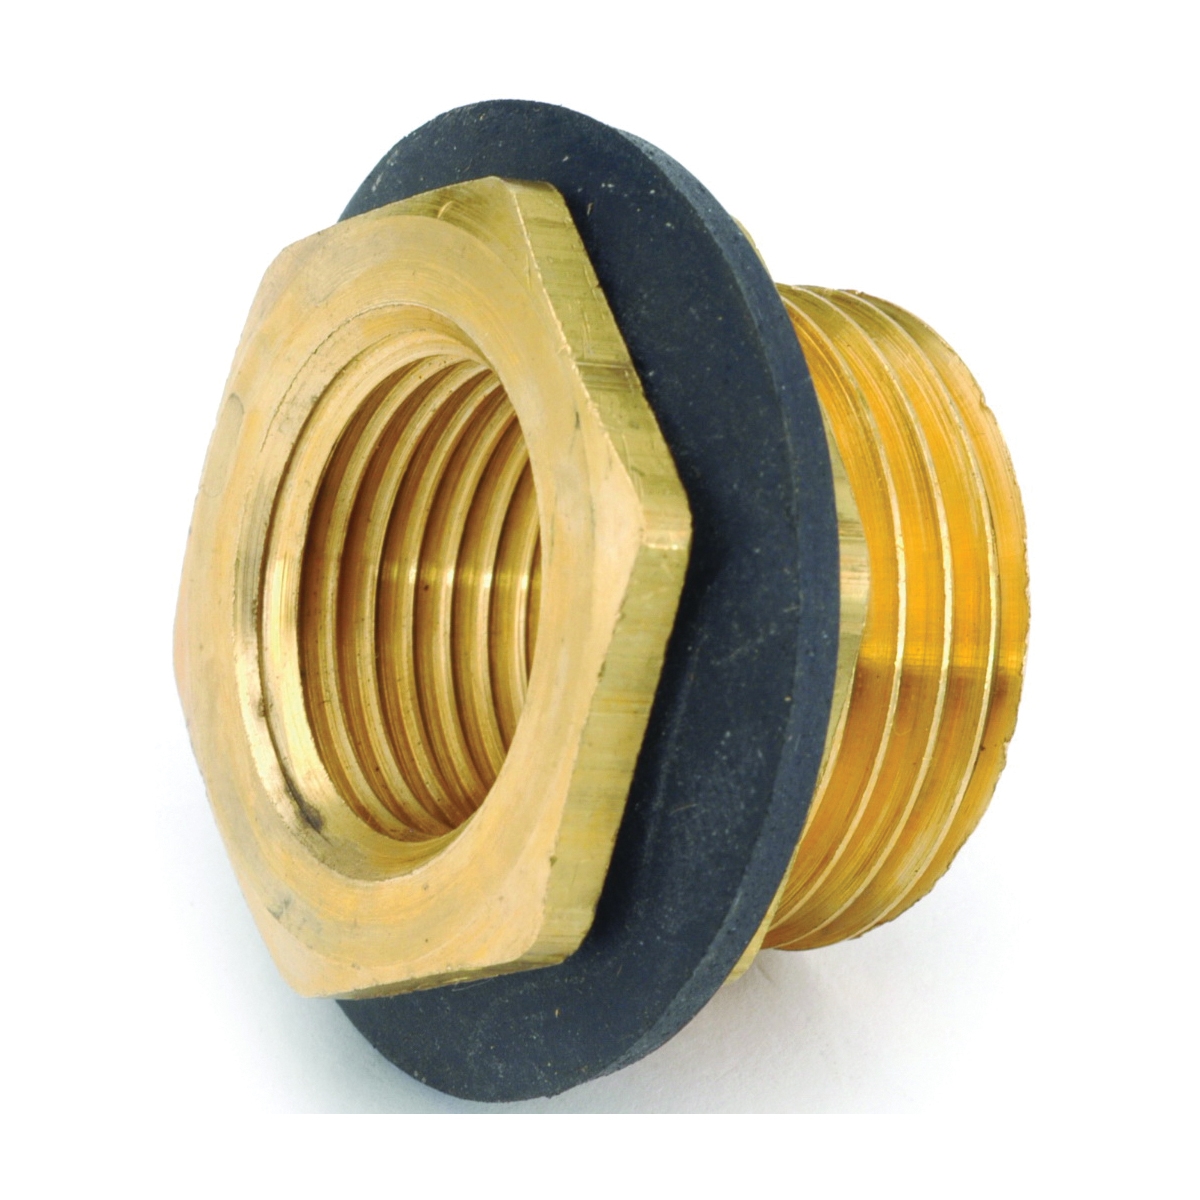 57487-1208 Cooler Nipple, Brass, For: Evaporative Cooler Purge Systems